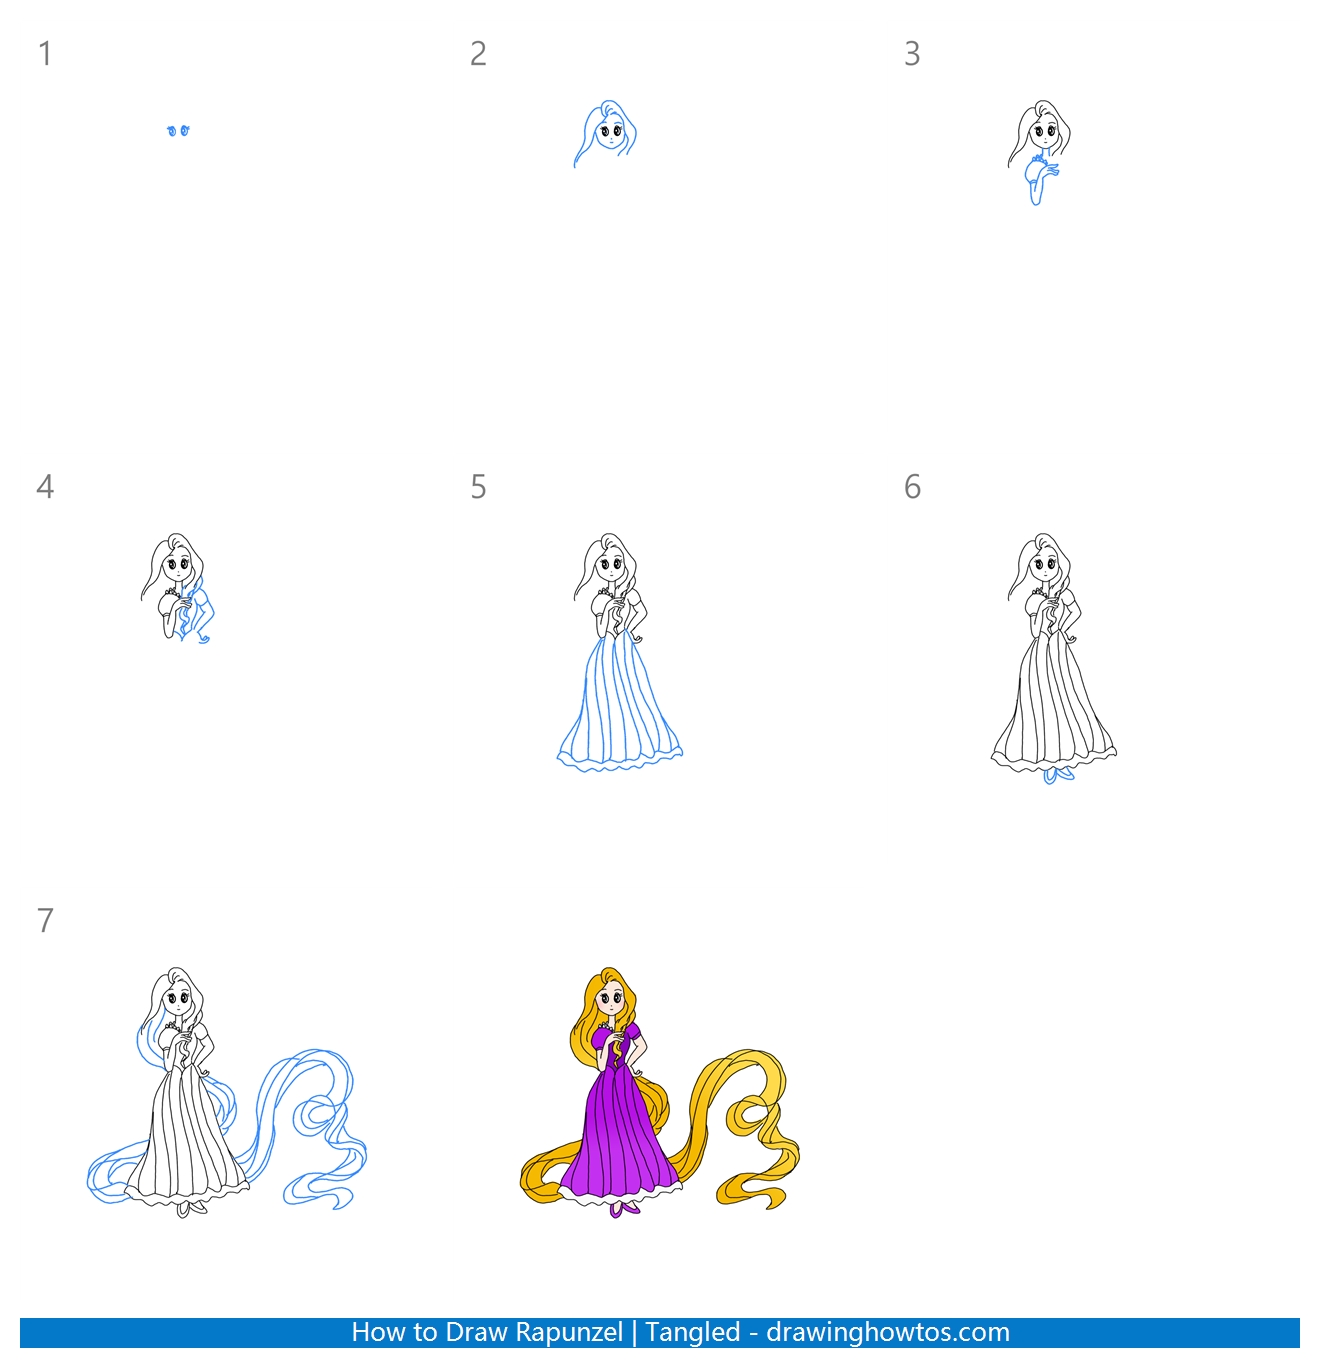 How to Draw Rapunzel | Tangled Step by Step